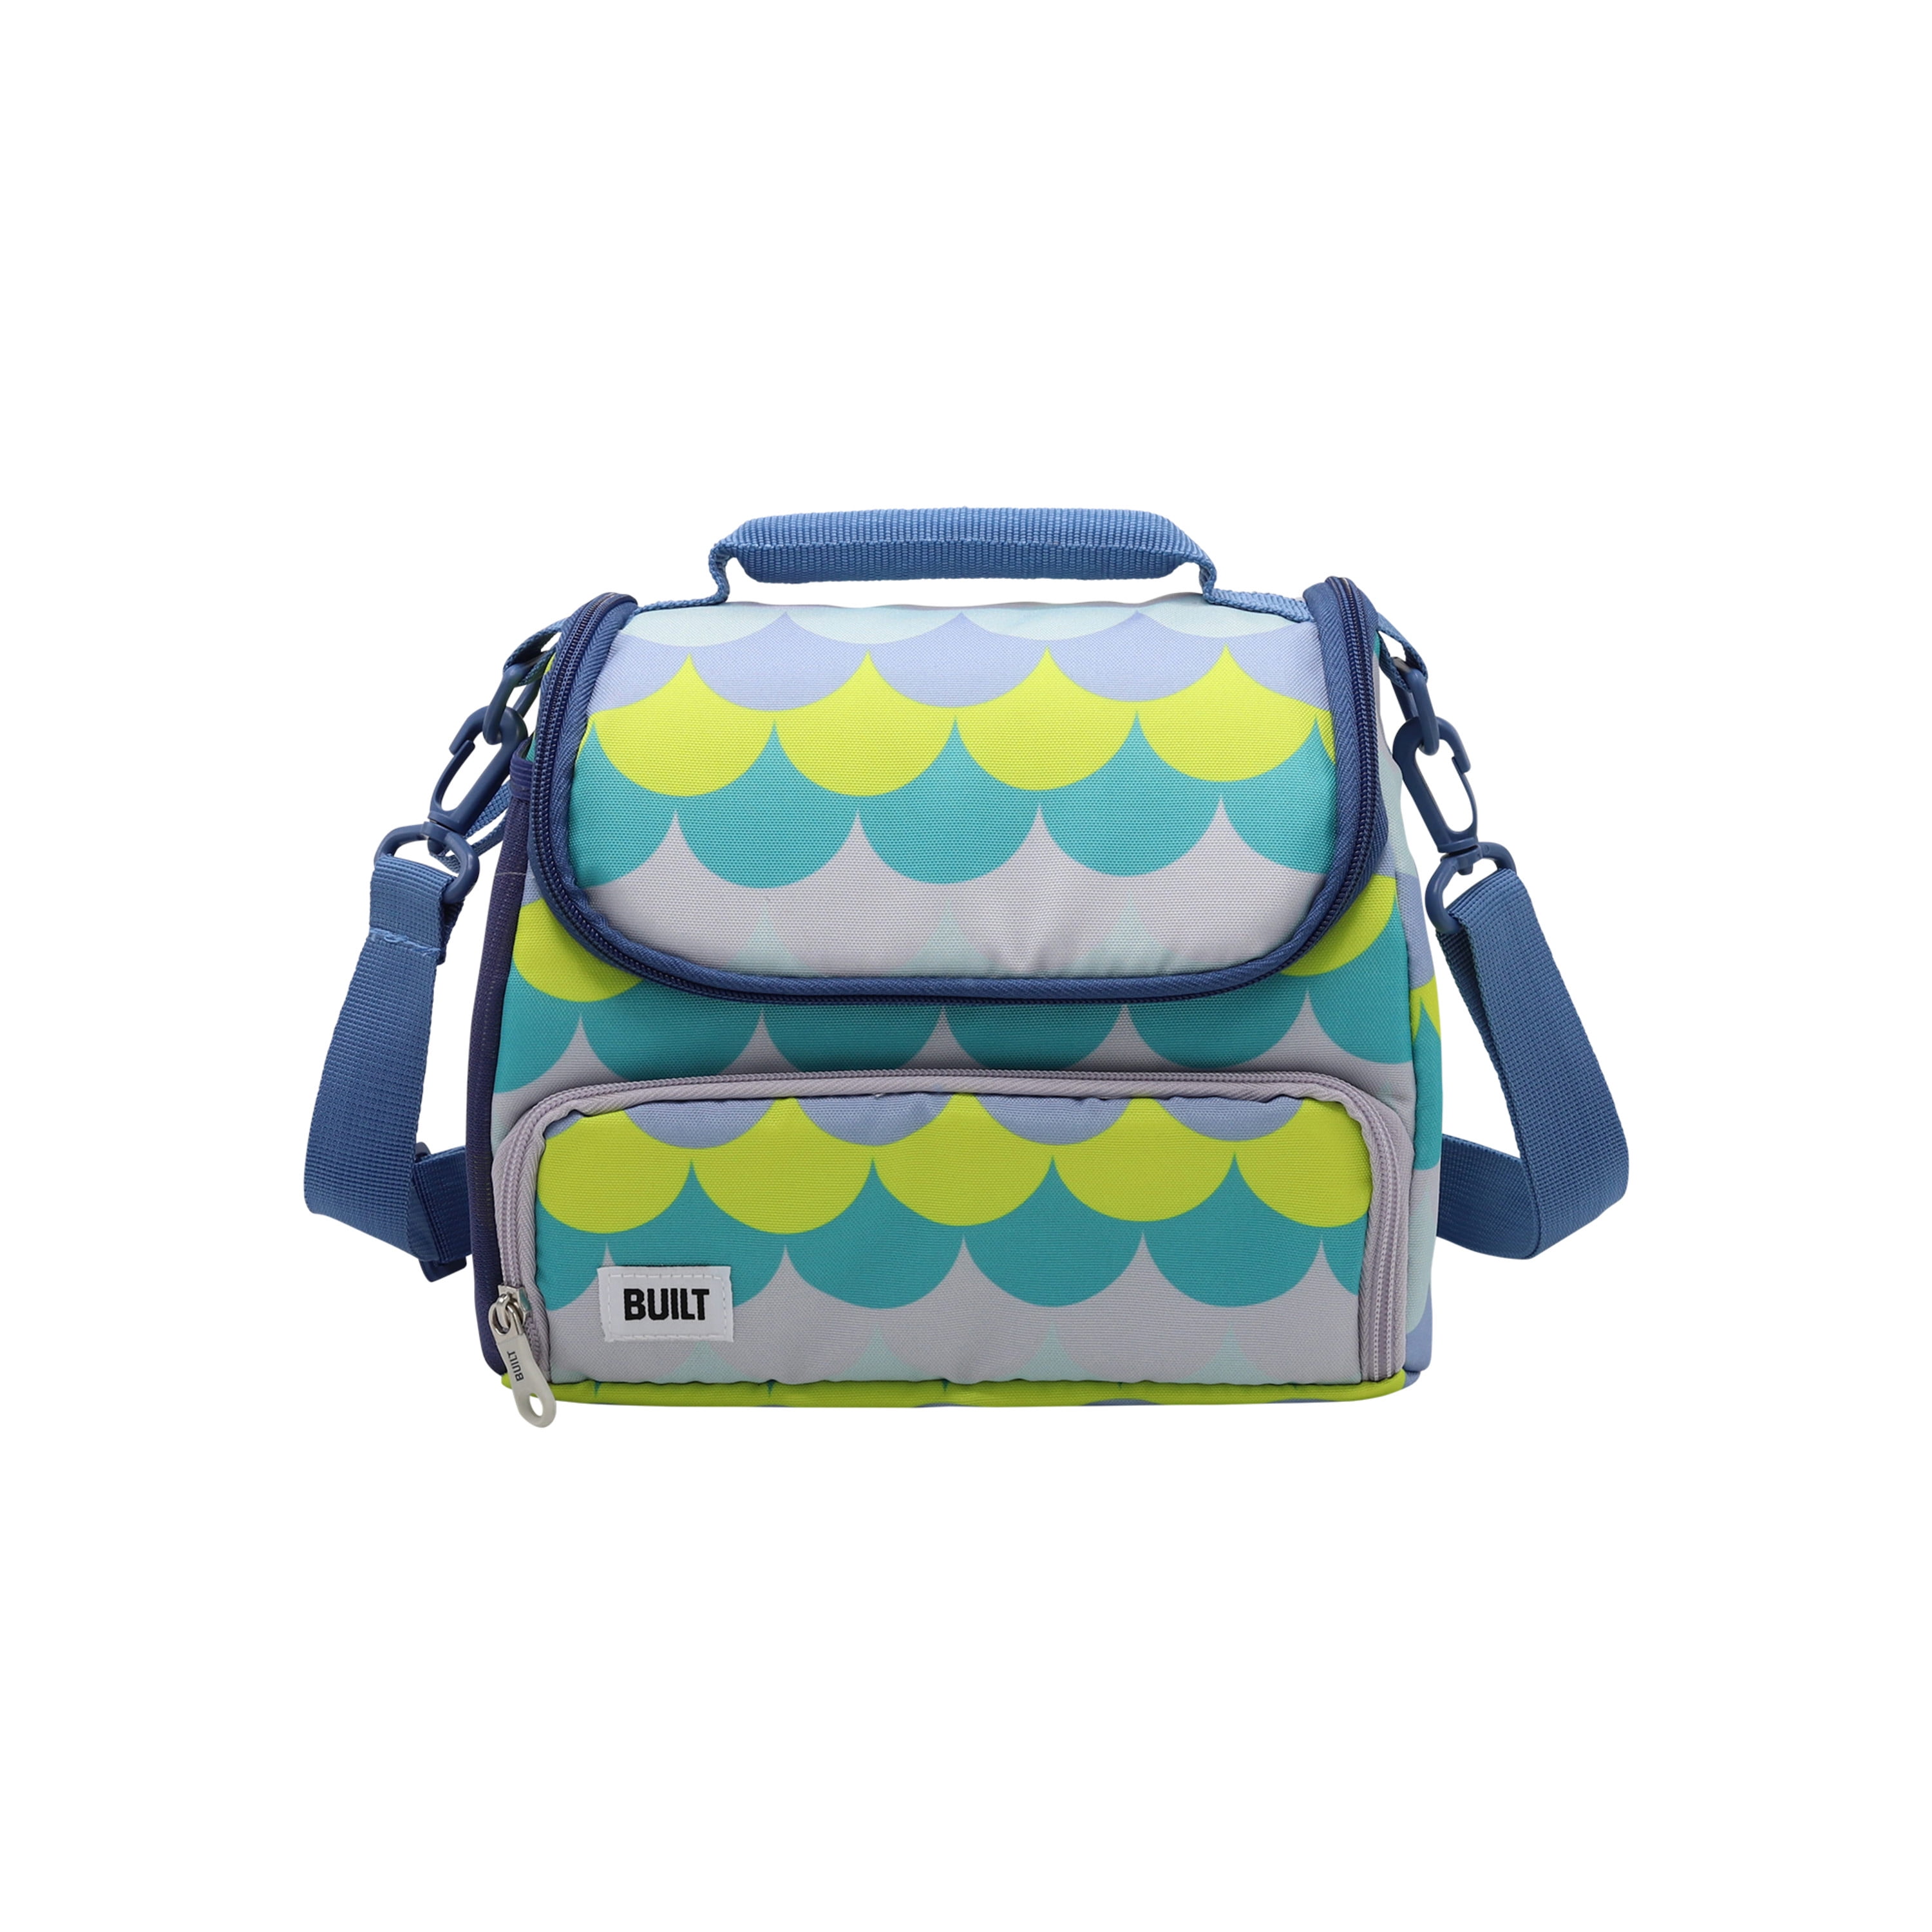 Built Insulated Lunch Bag with 'The Retro' Design, Polyester, Teal, 18.5 x  24 x 26 cm